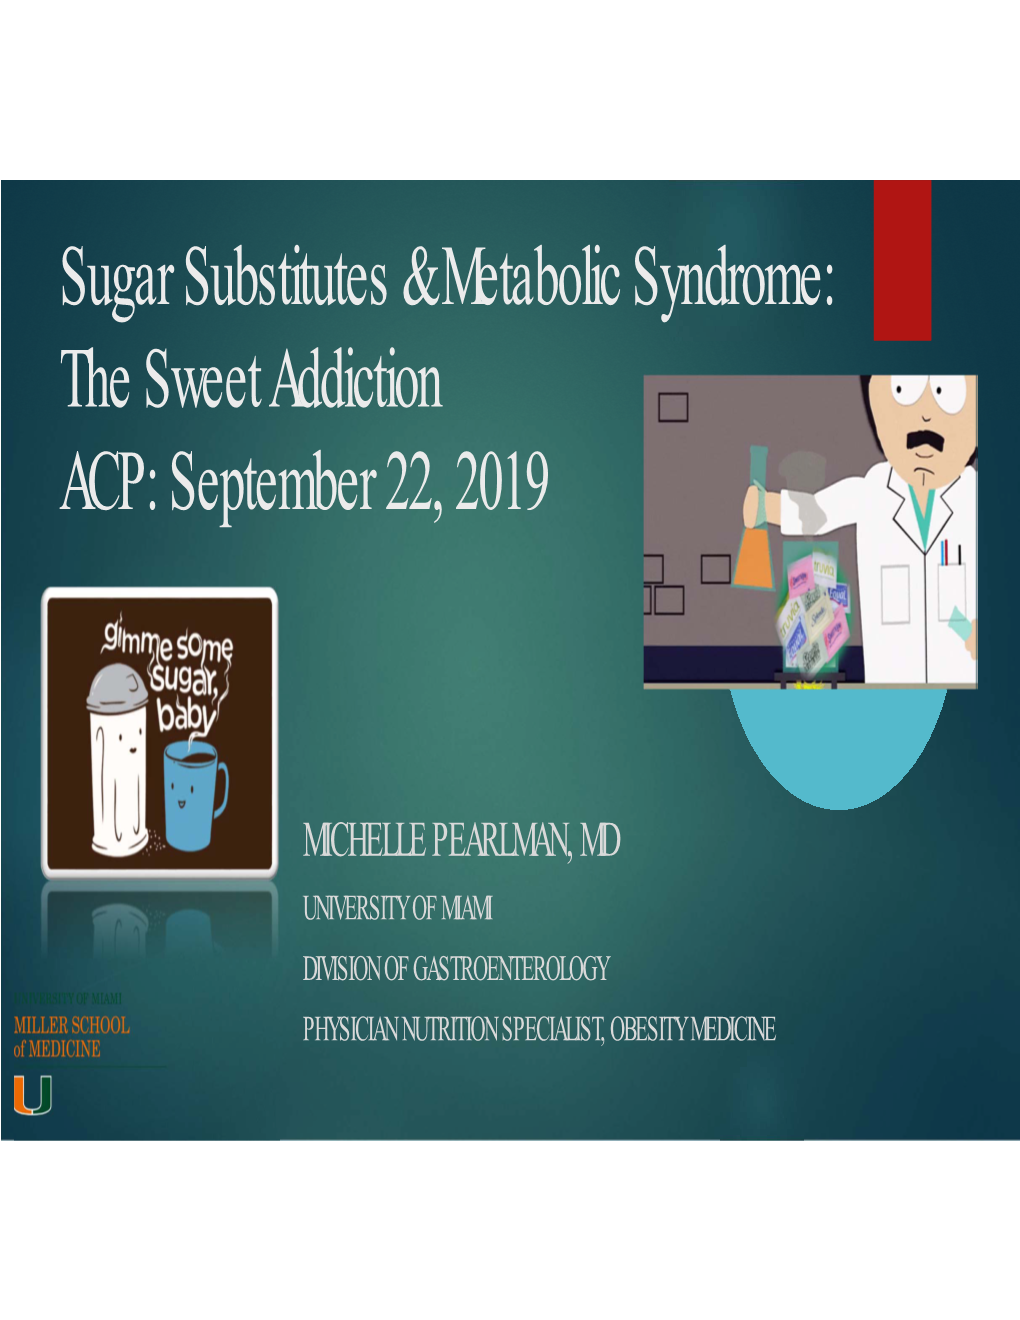 Sugar Substitutes & Metabolic Syndrome: the Sweet Addiction